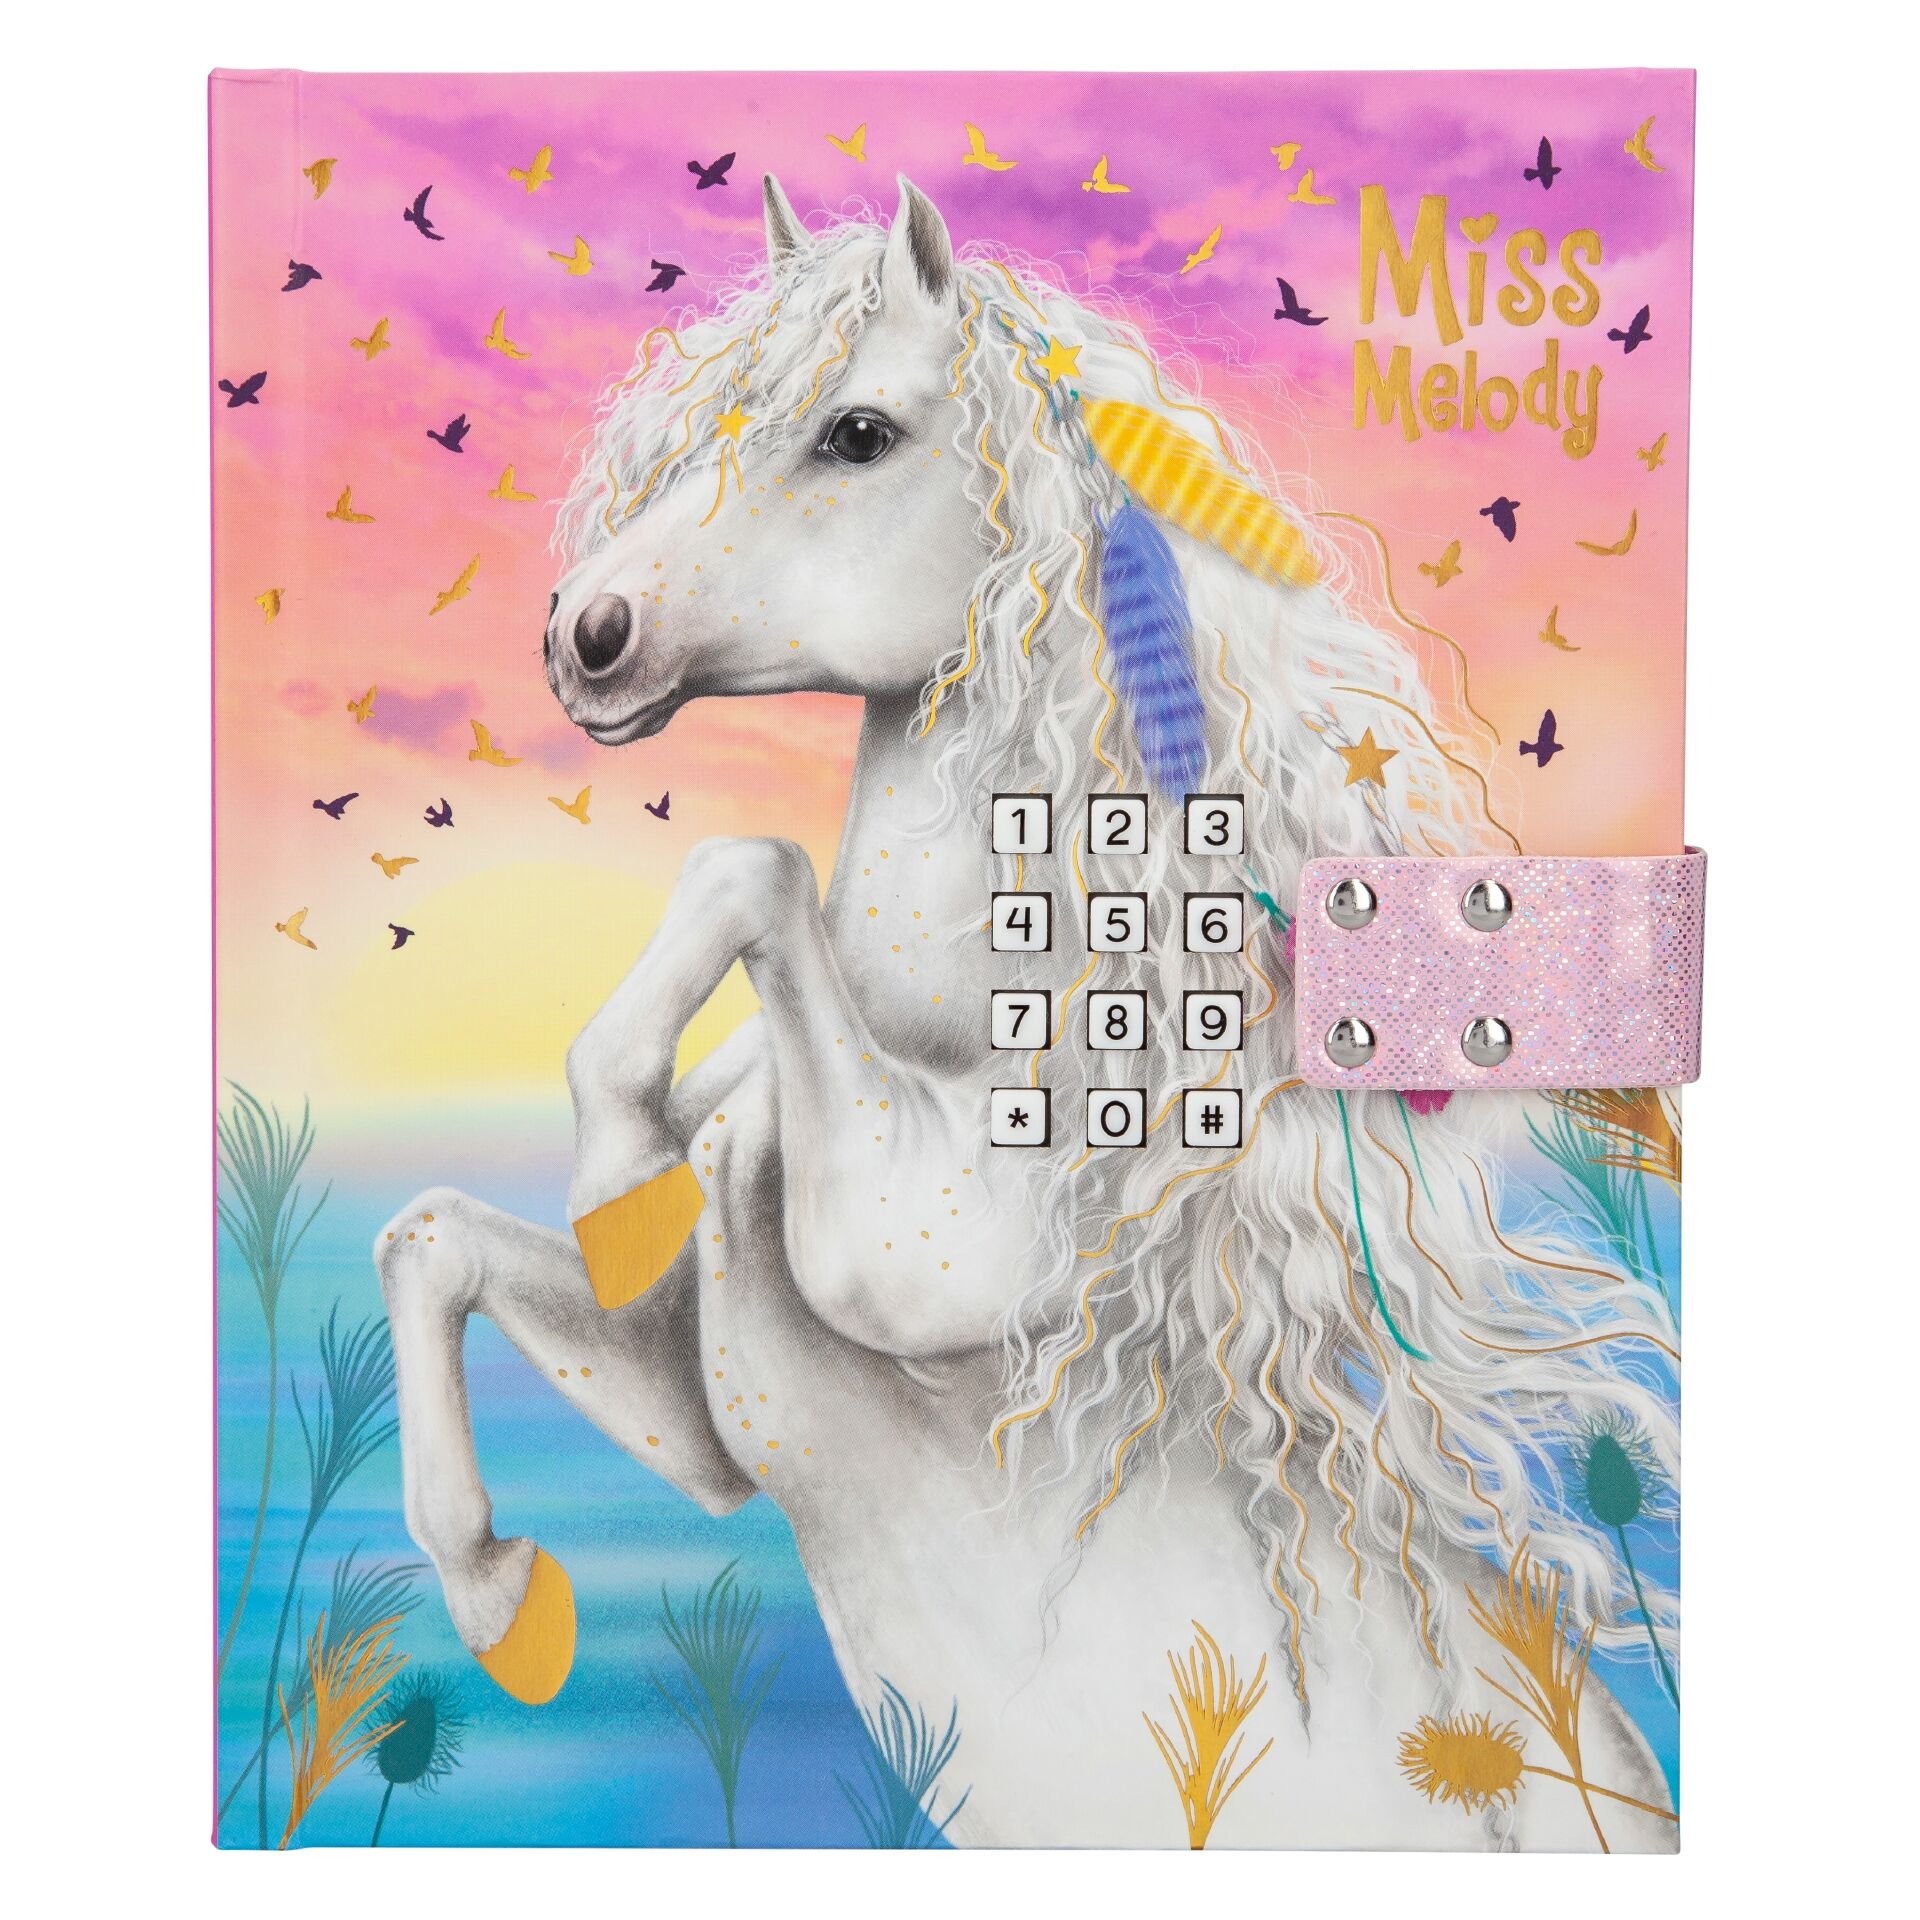 Miss Melody - Diary with Code & Sound - Rainbow (410858)